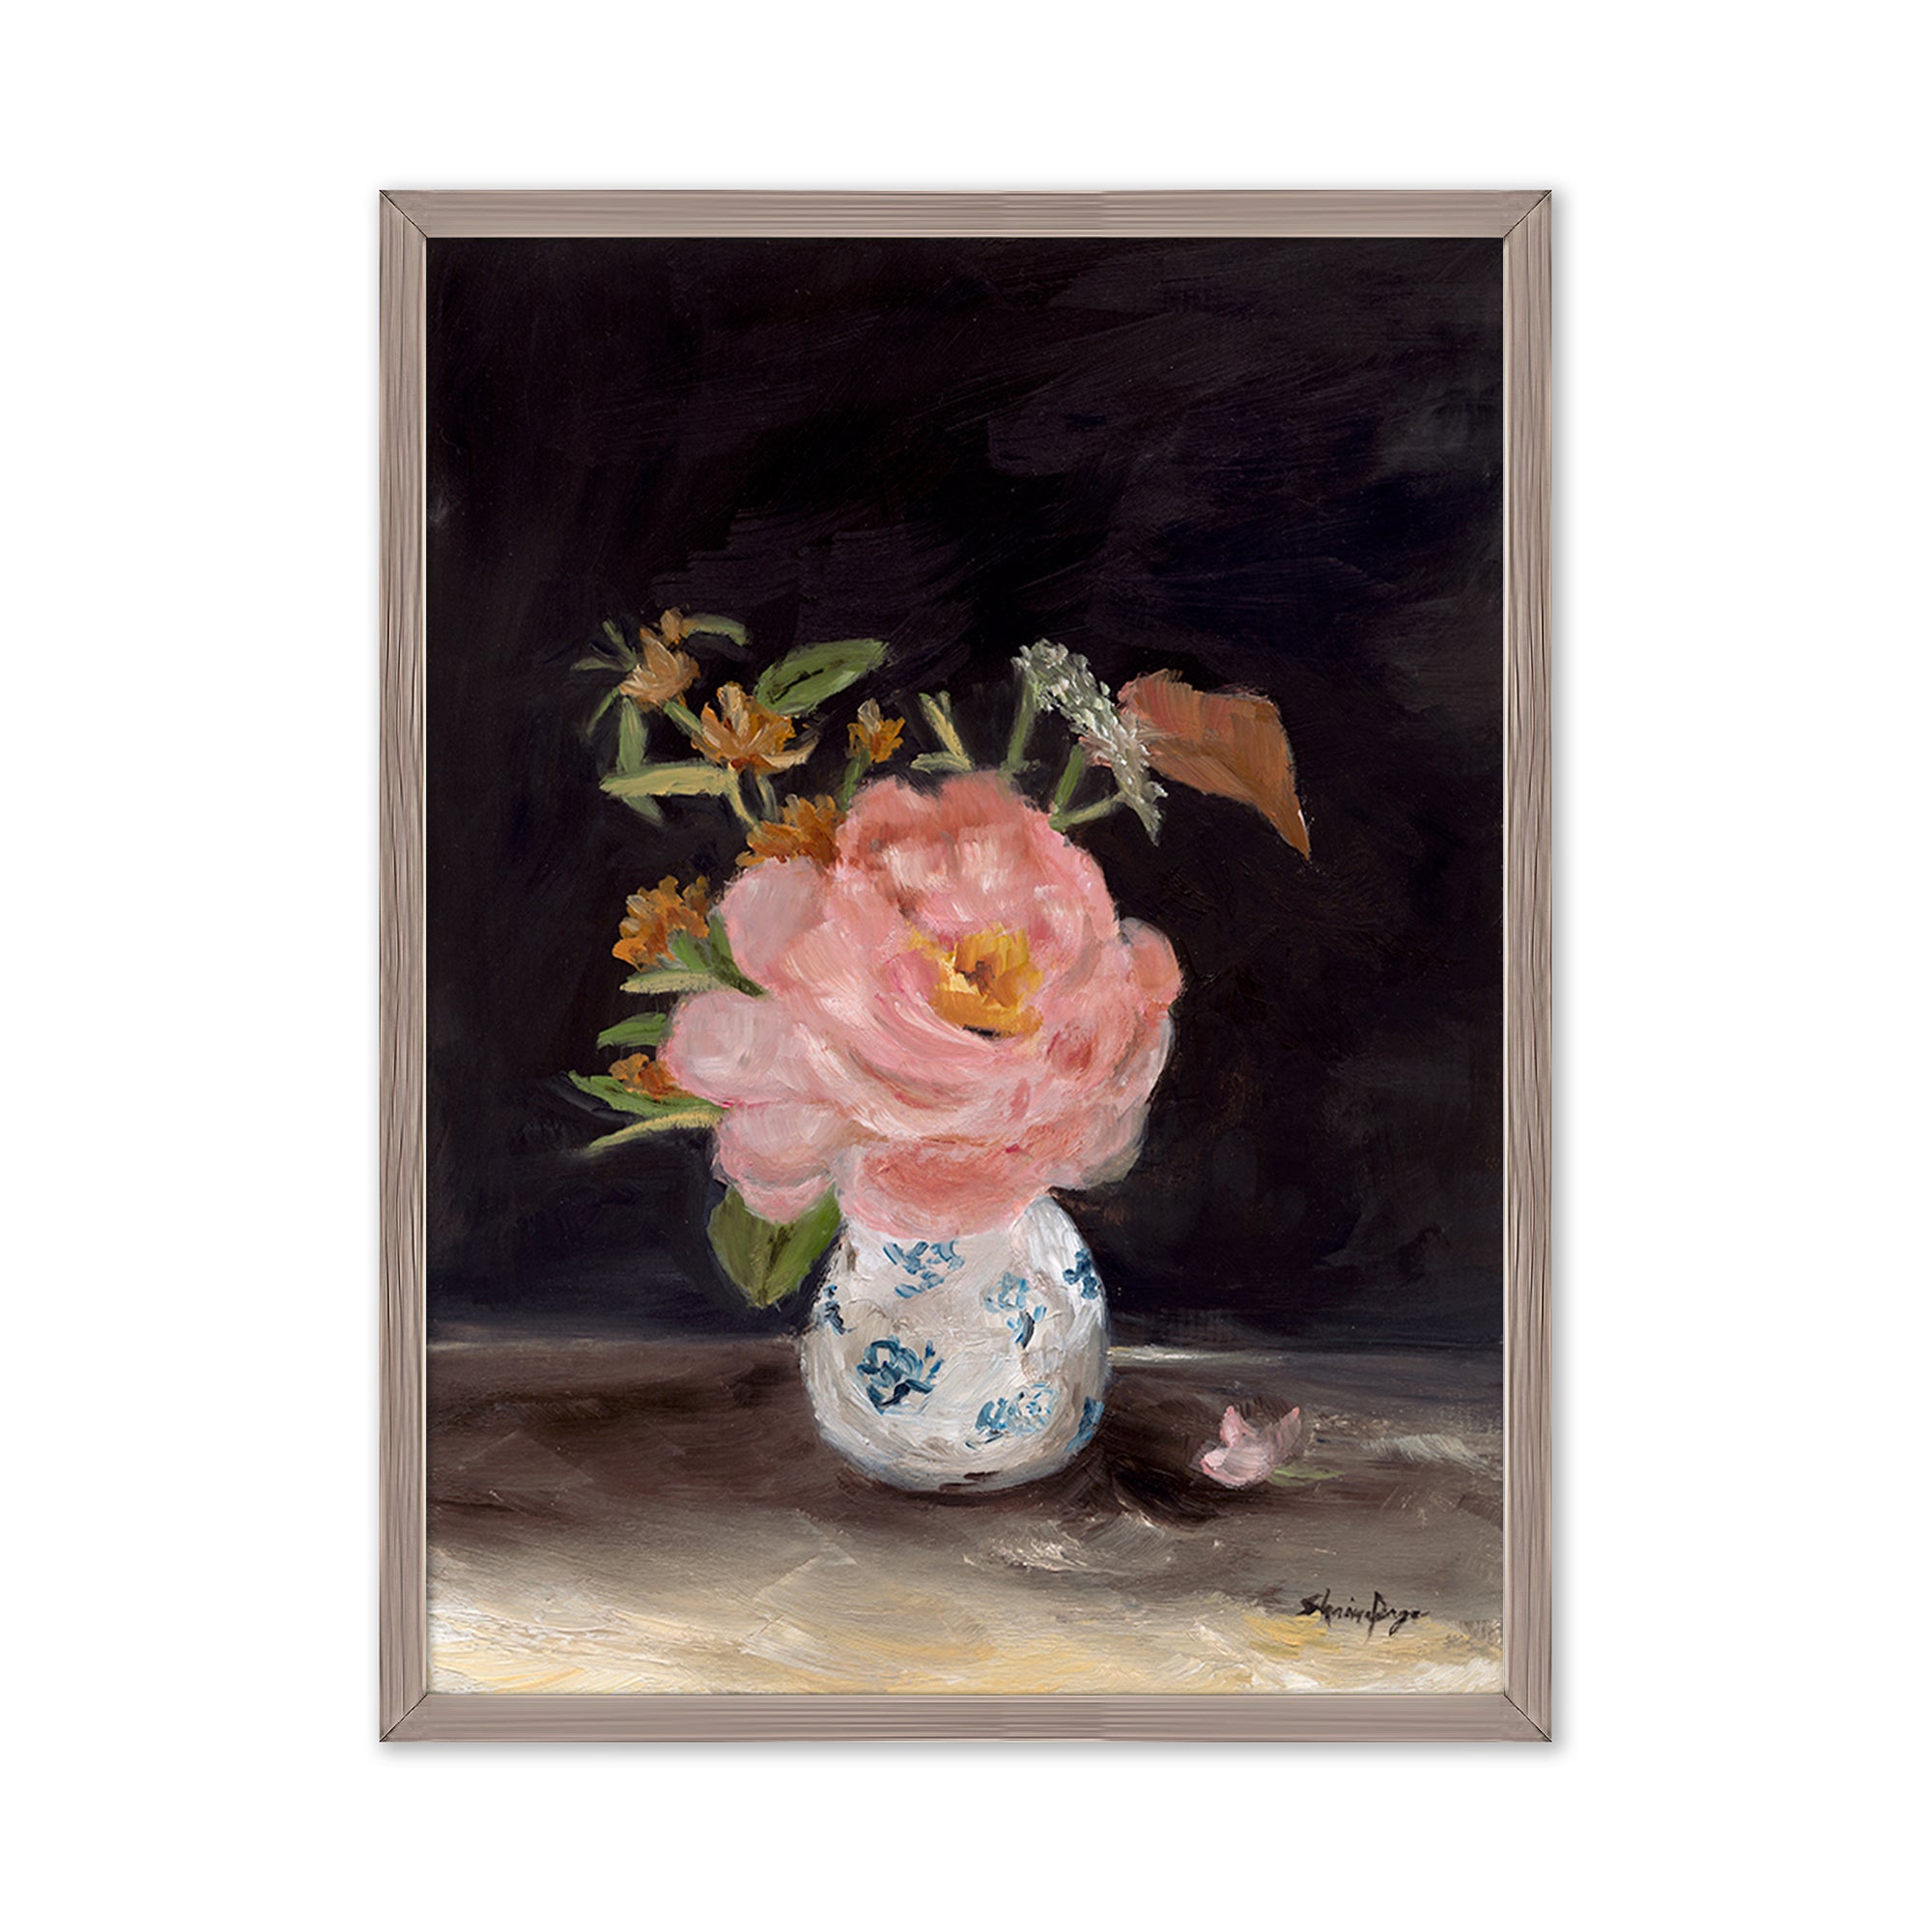 Framed wall art called Pink Peony by Shaina Page